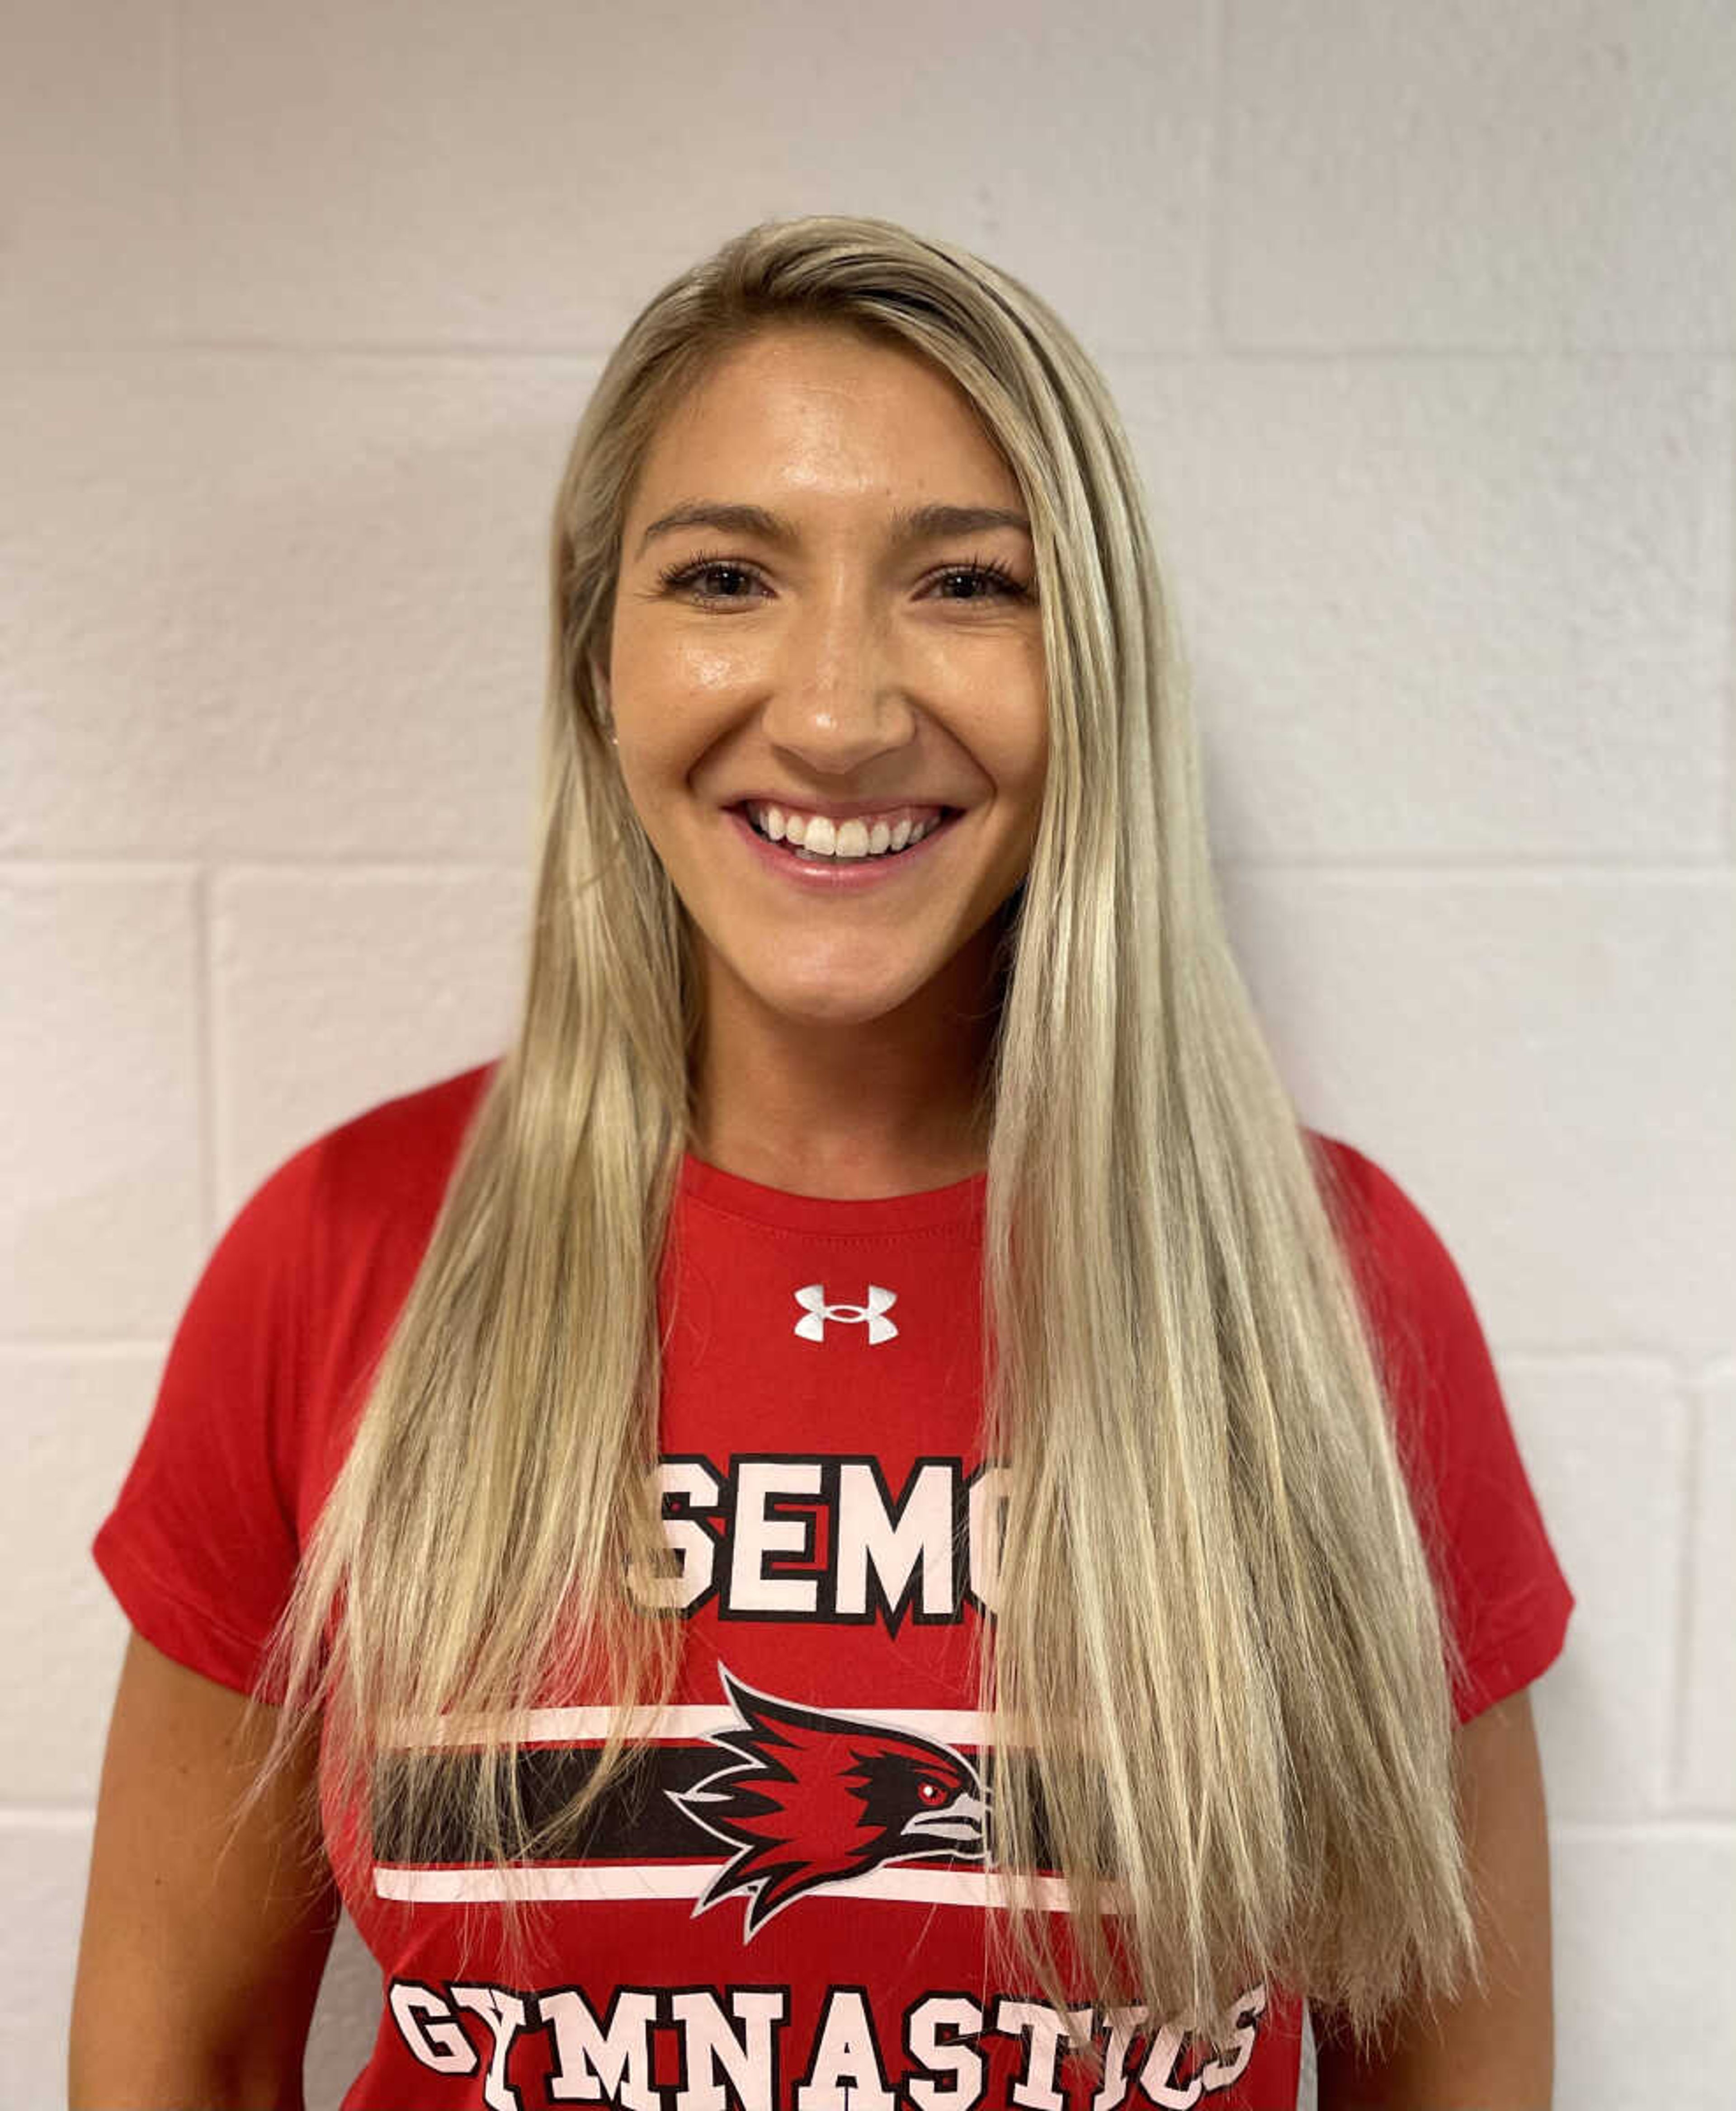 SEMO Gymnastics coach Kayleen Burns will start her first season as a coach at SEMO. Burns will be in her third season of coaching, as she spent the previous two at her alma mater Suny Brockport, a Division III school in New York. 